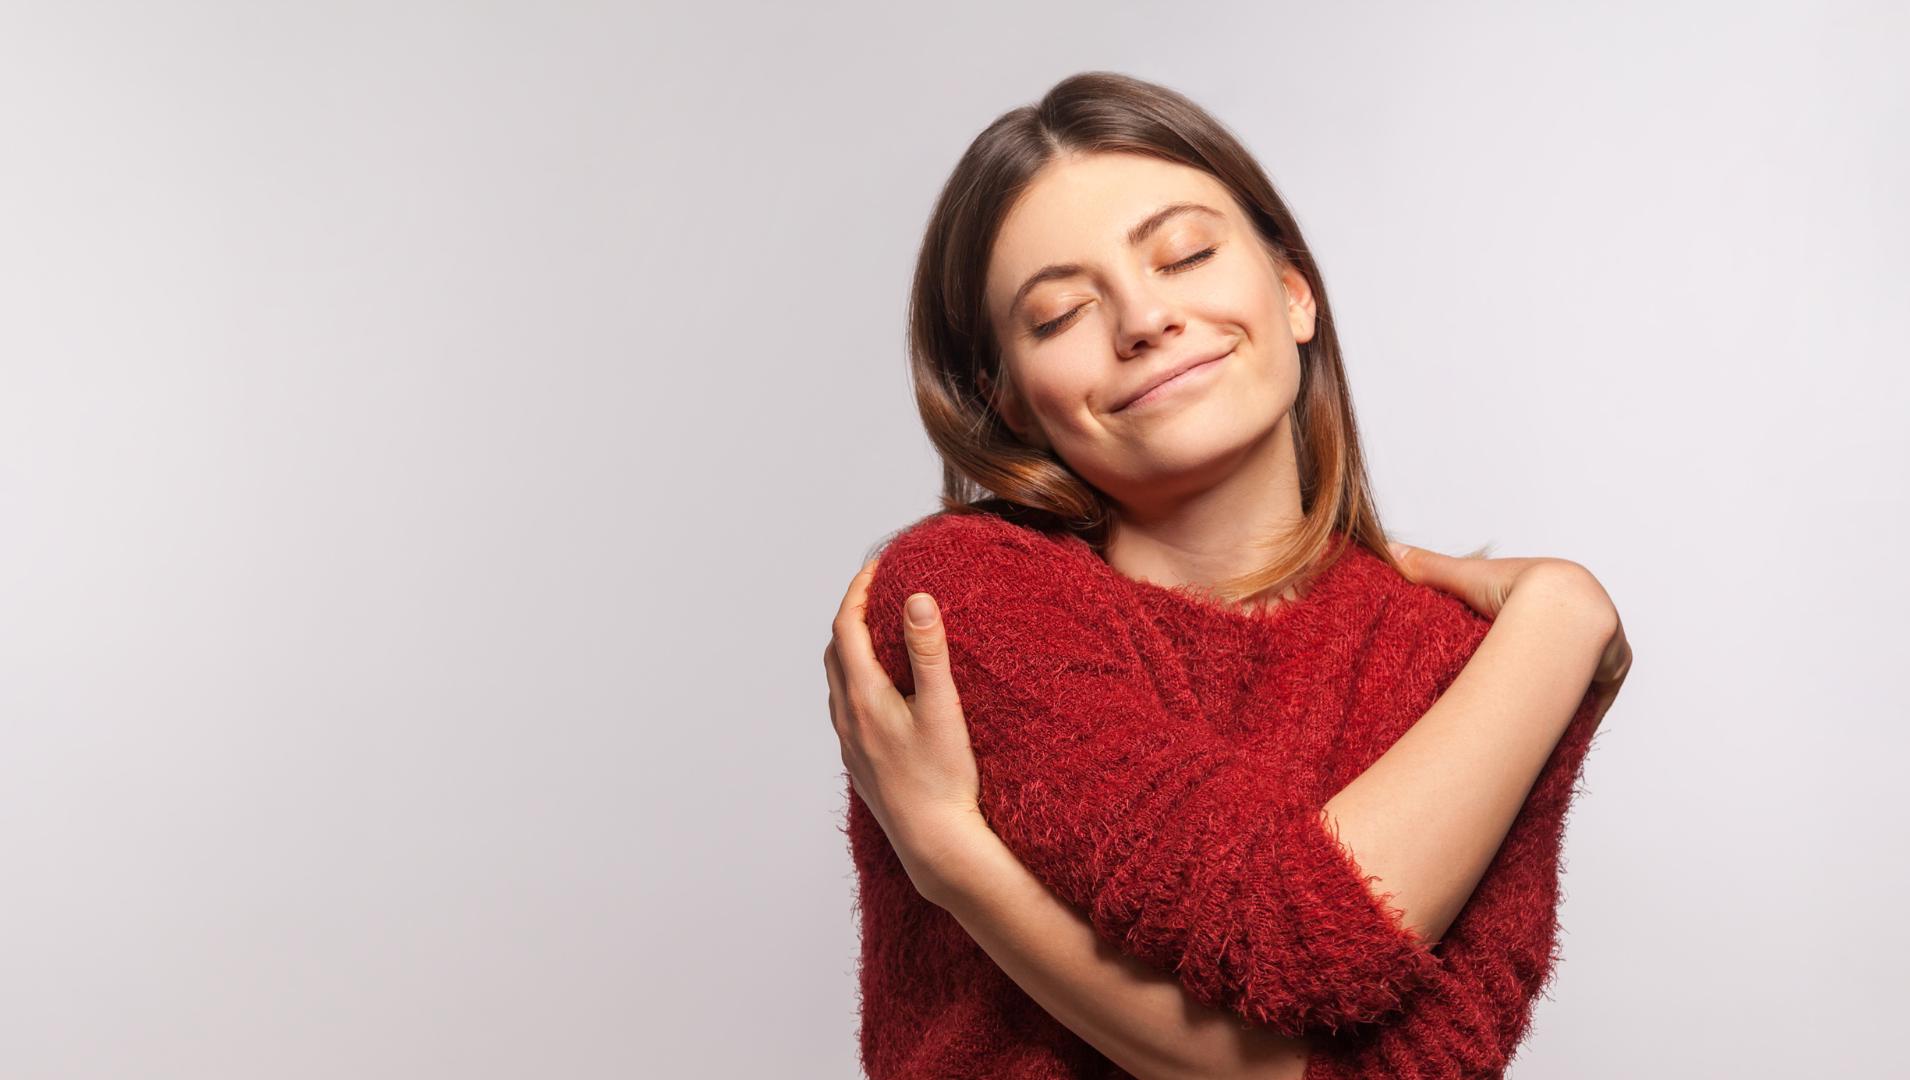 A woman crosses her arms to hug herself and smiles to show she's taking care of her mental health.